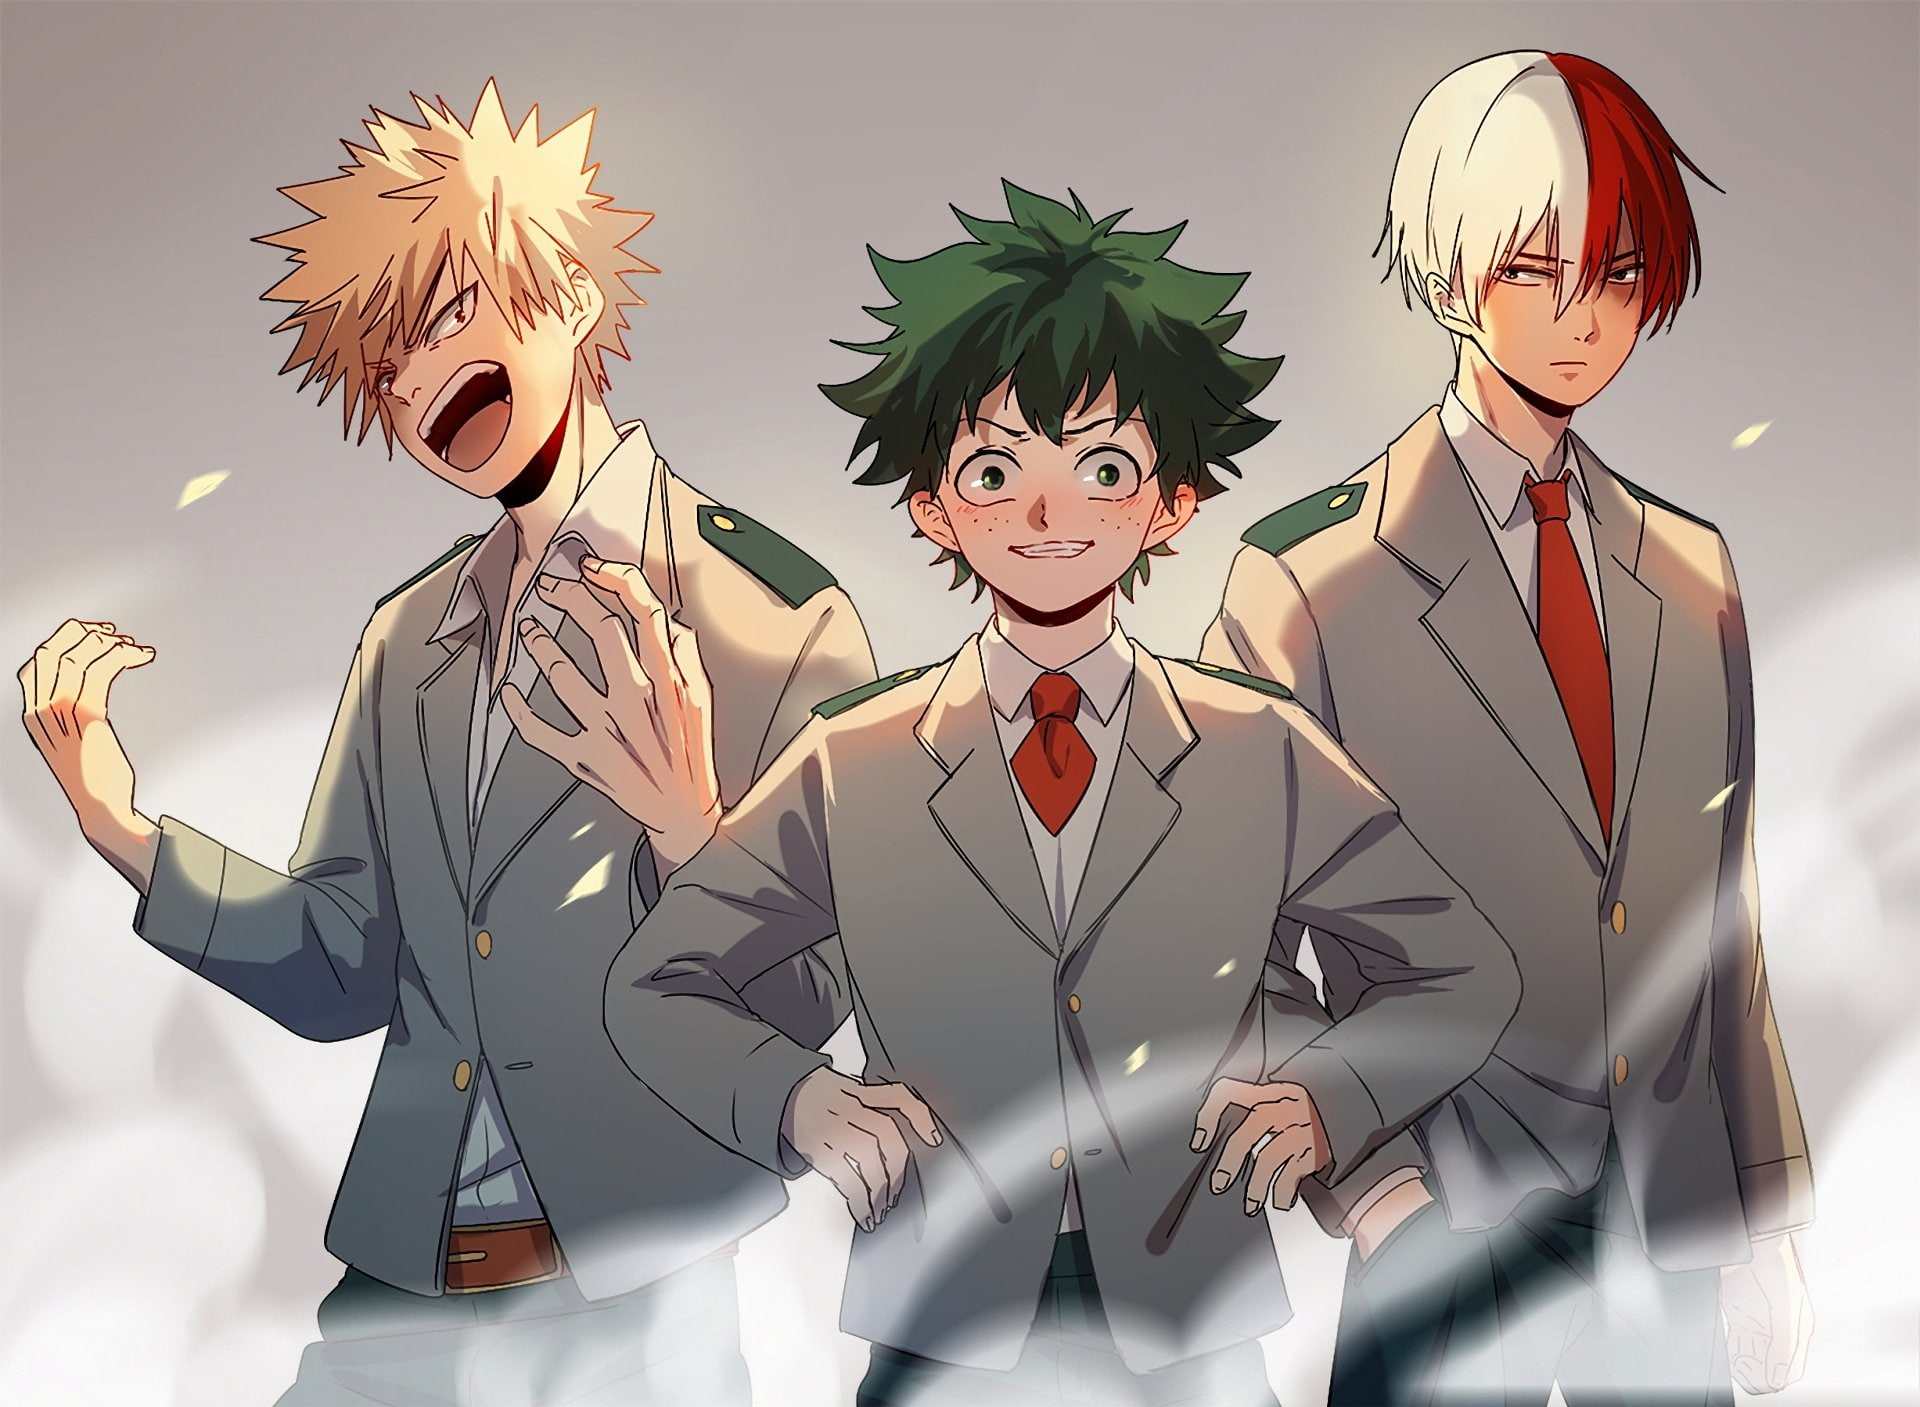 View, Download, Rate, and Comment on this My Hero Academia Image. image,ima...